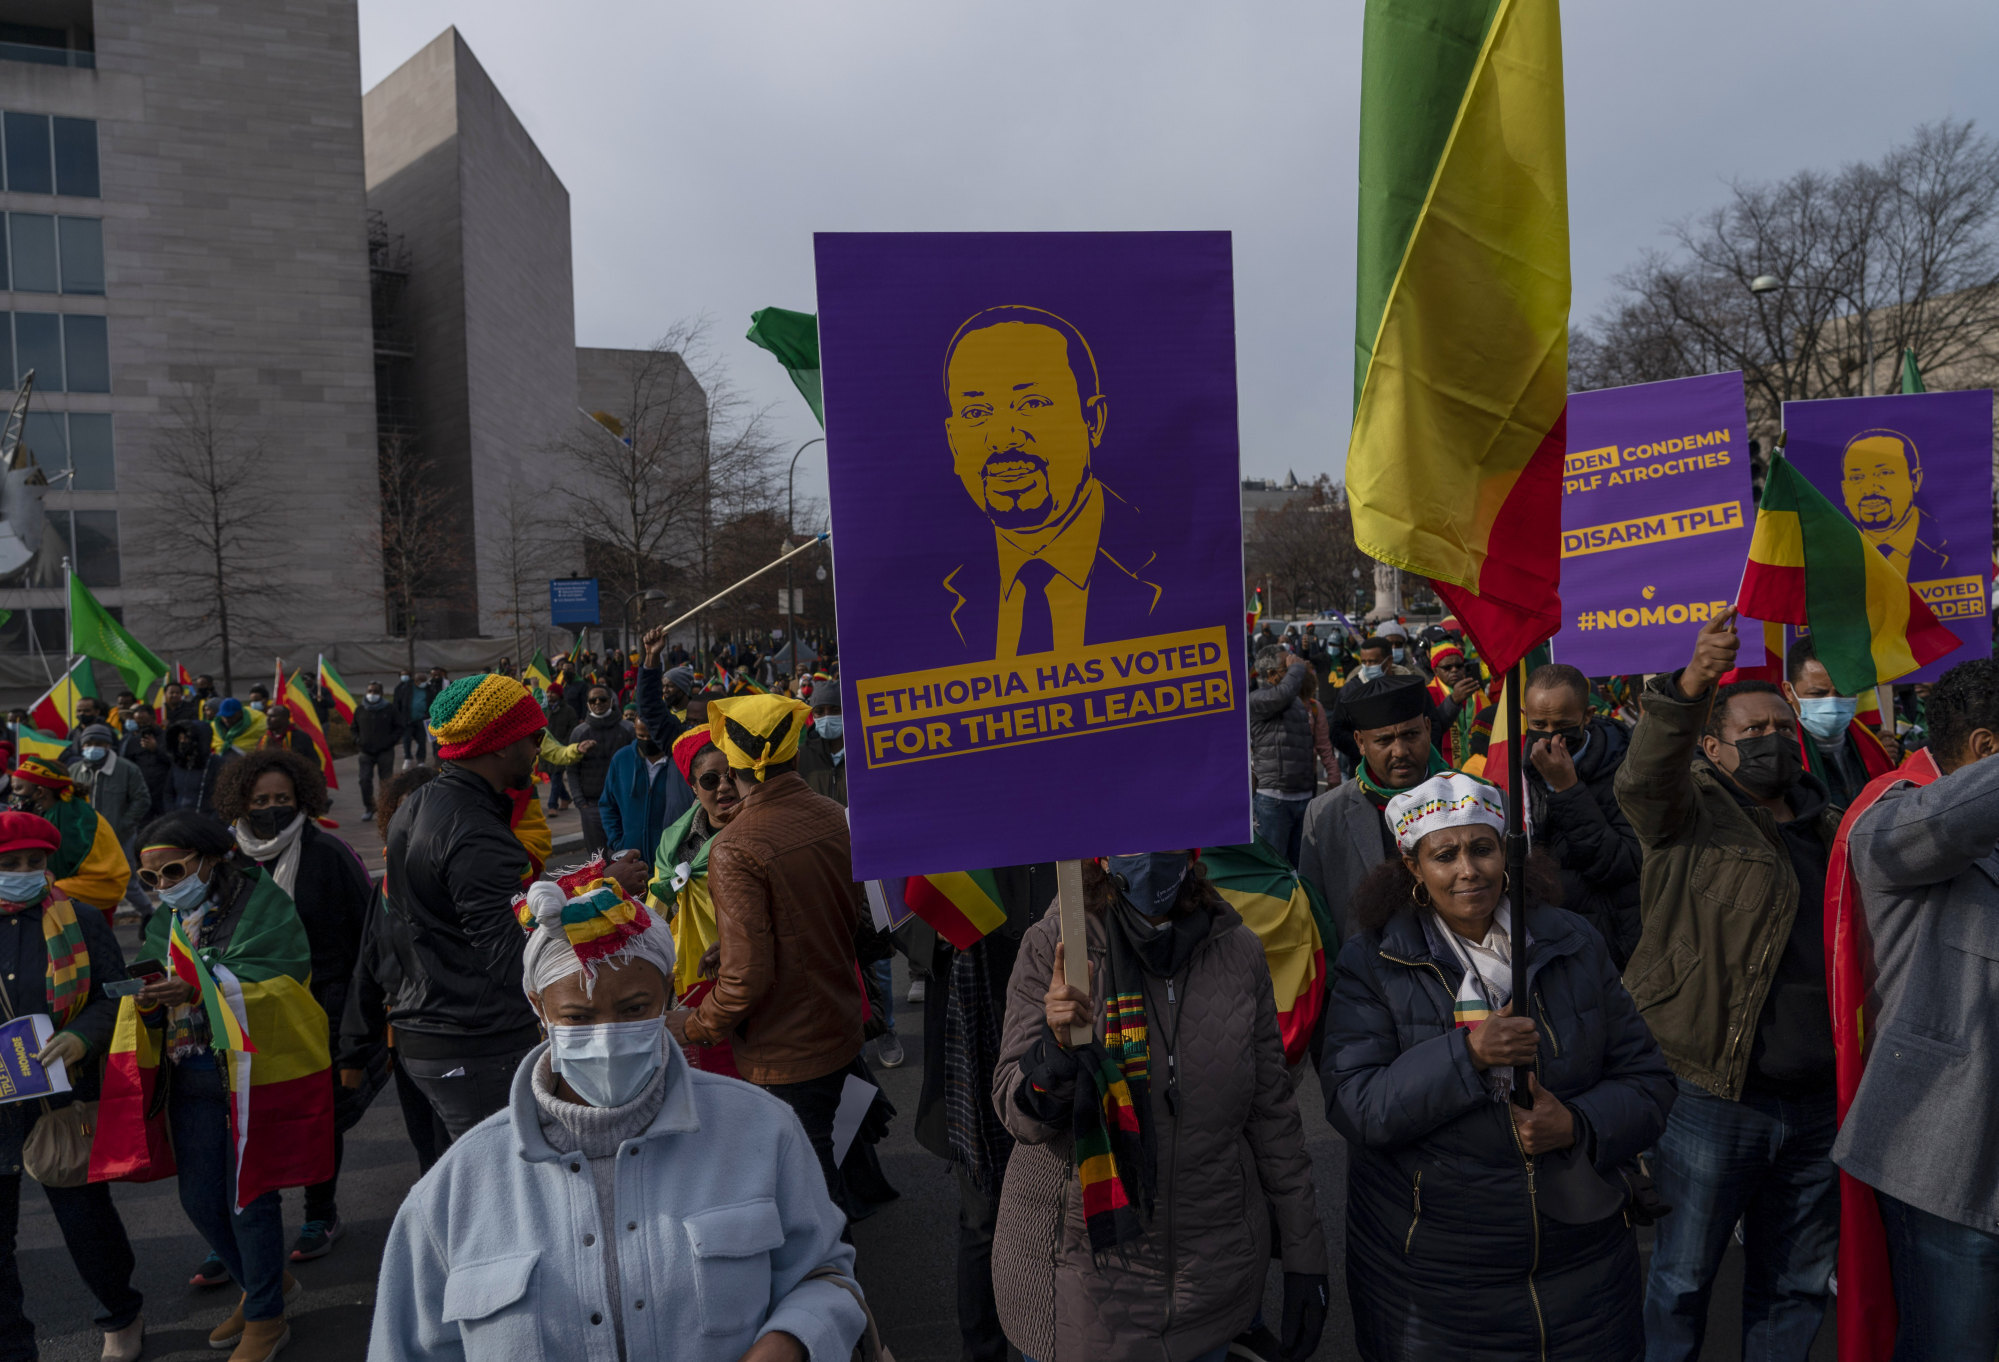 Supporters of Ethiopian Prime Minister Abiy Ahmed rally in Washington on December 10. Photo: AP